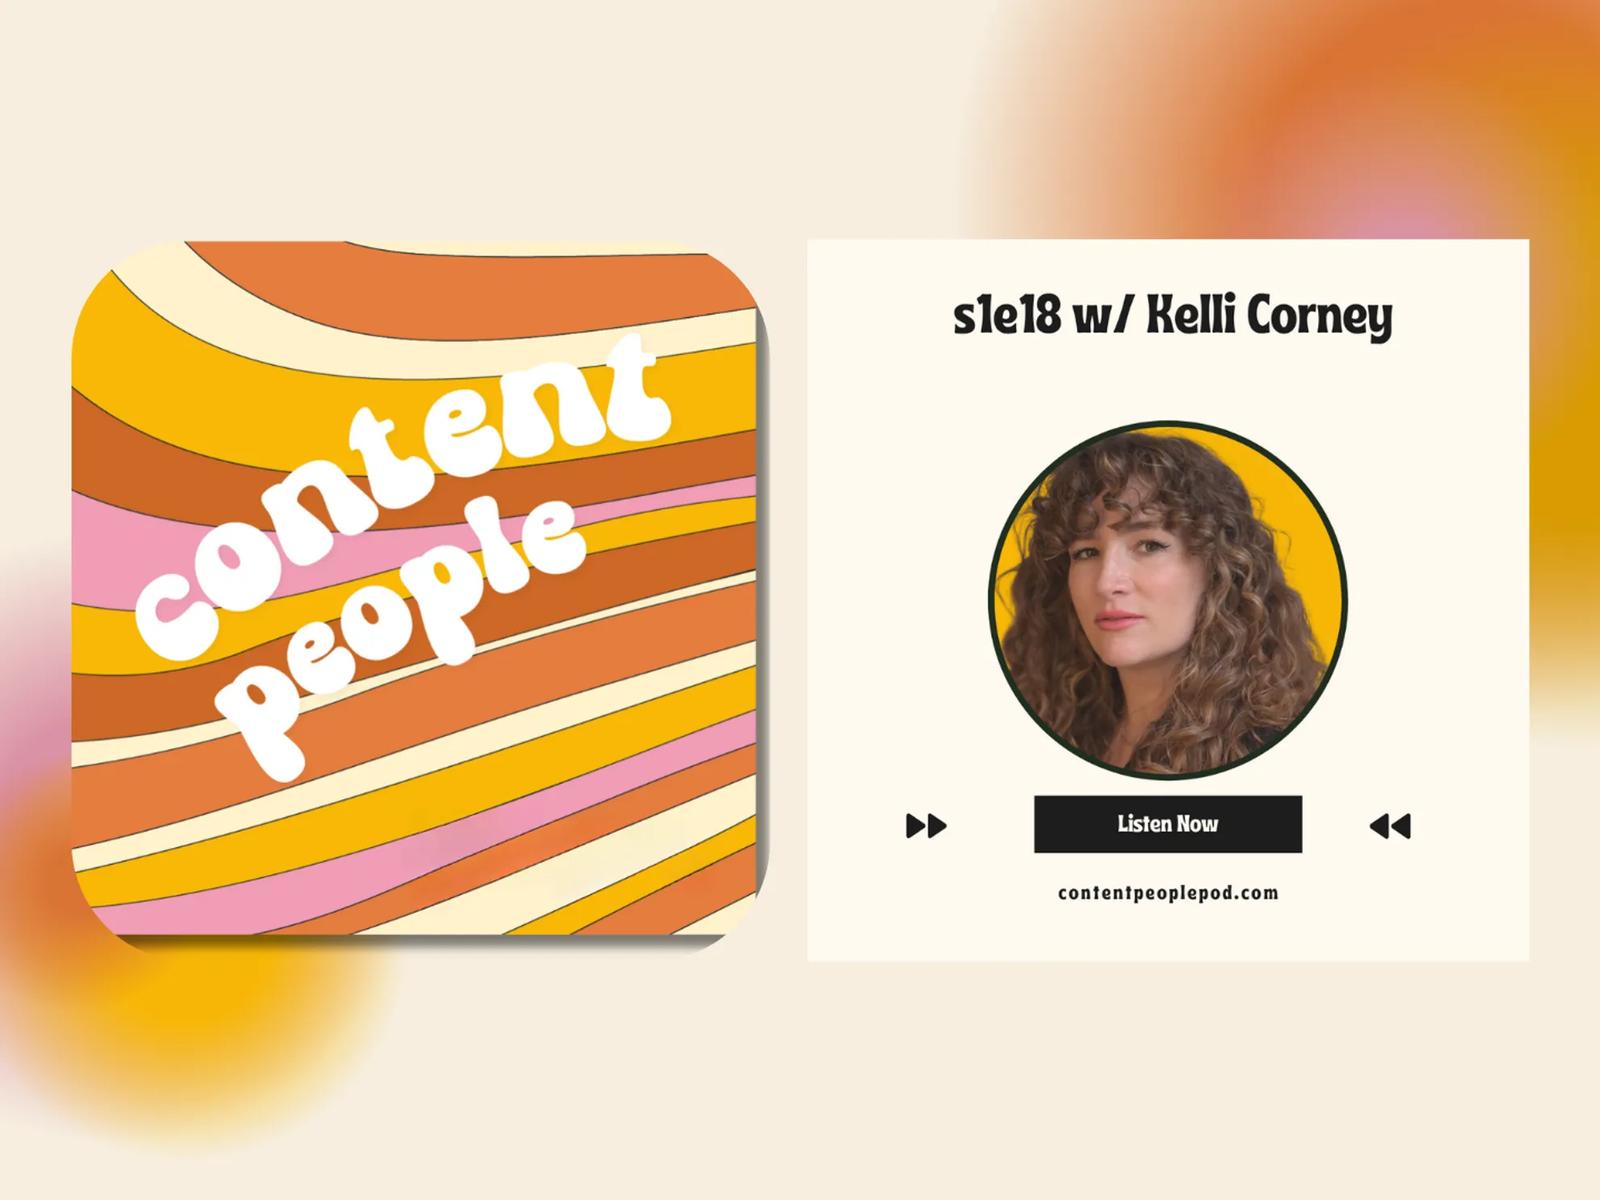 Content People / Podcast Guest